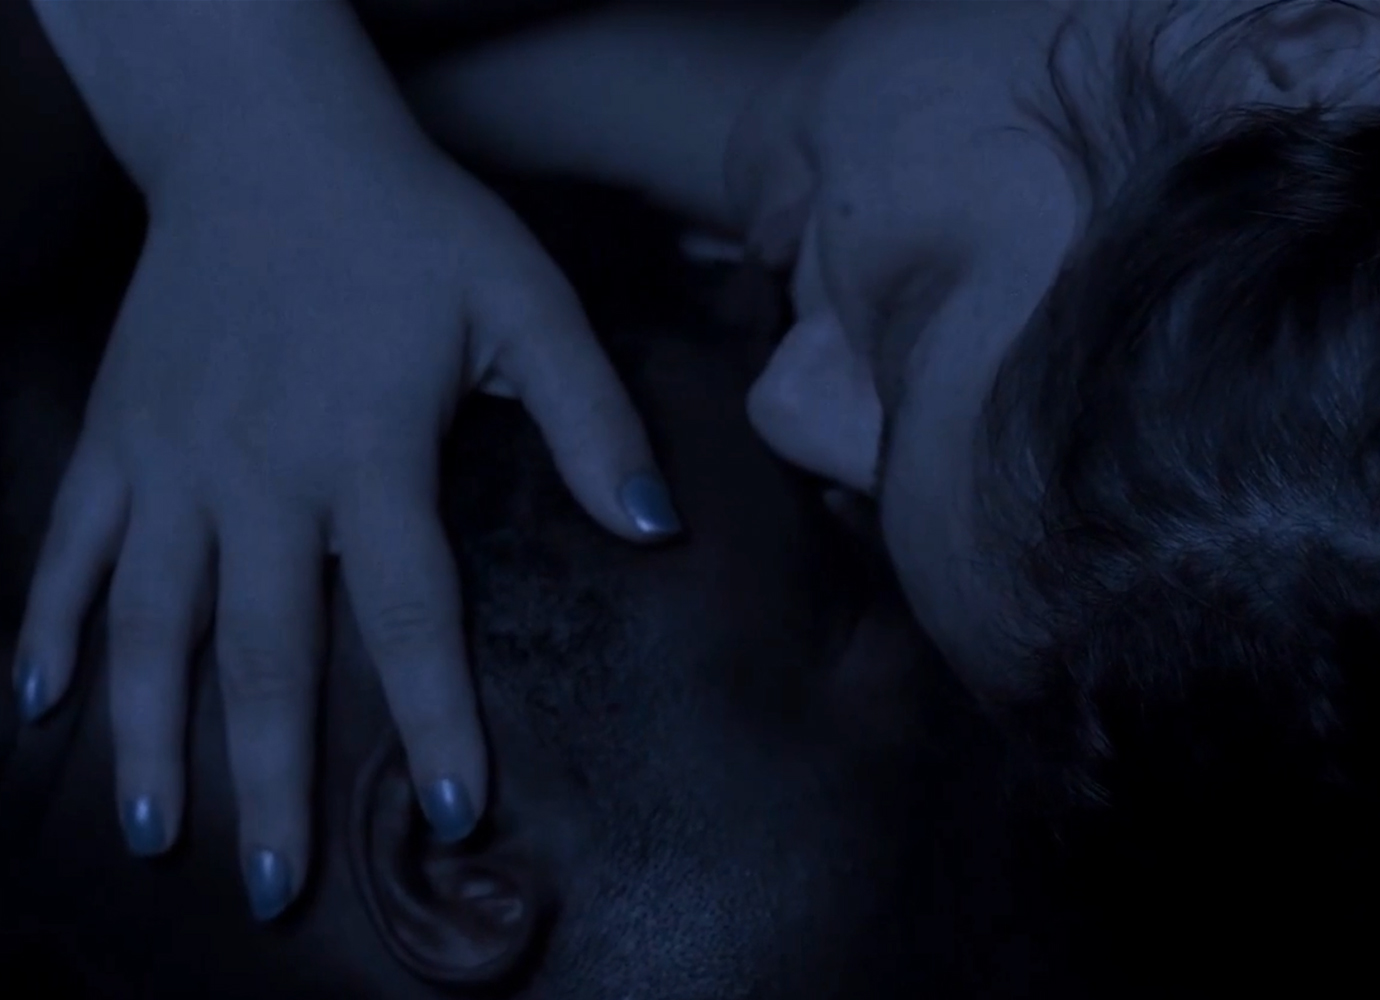 ‘Touch to unlock’: this sensual video proves sexuality pours from within 